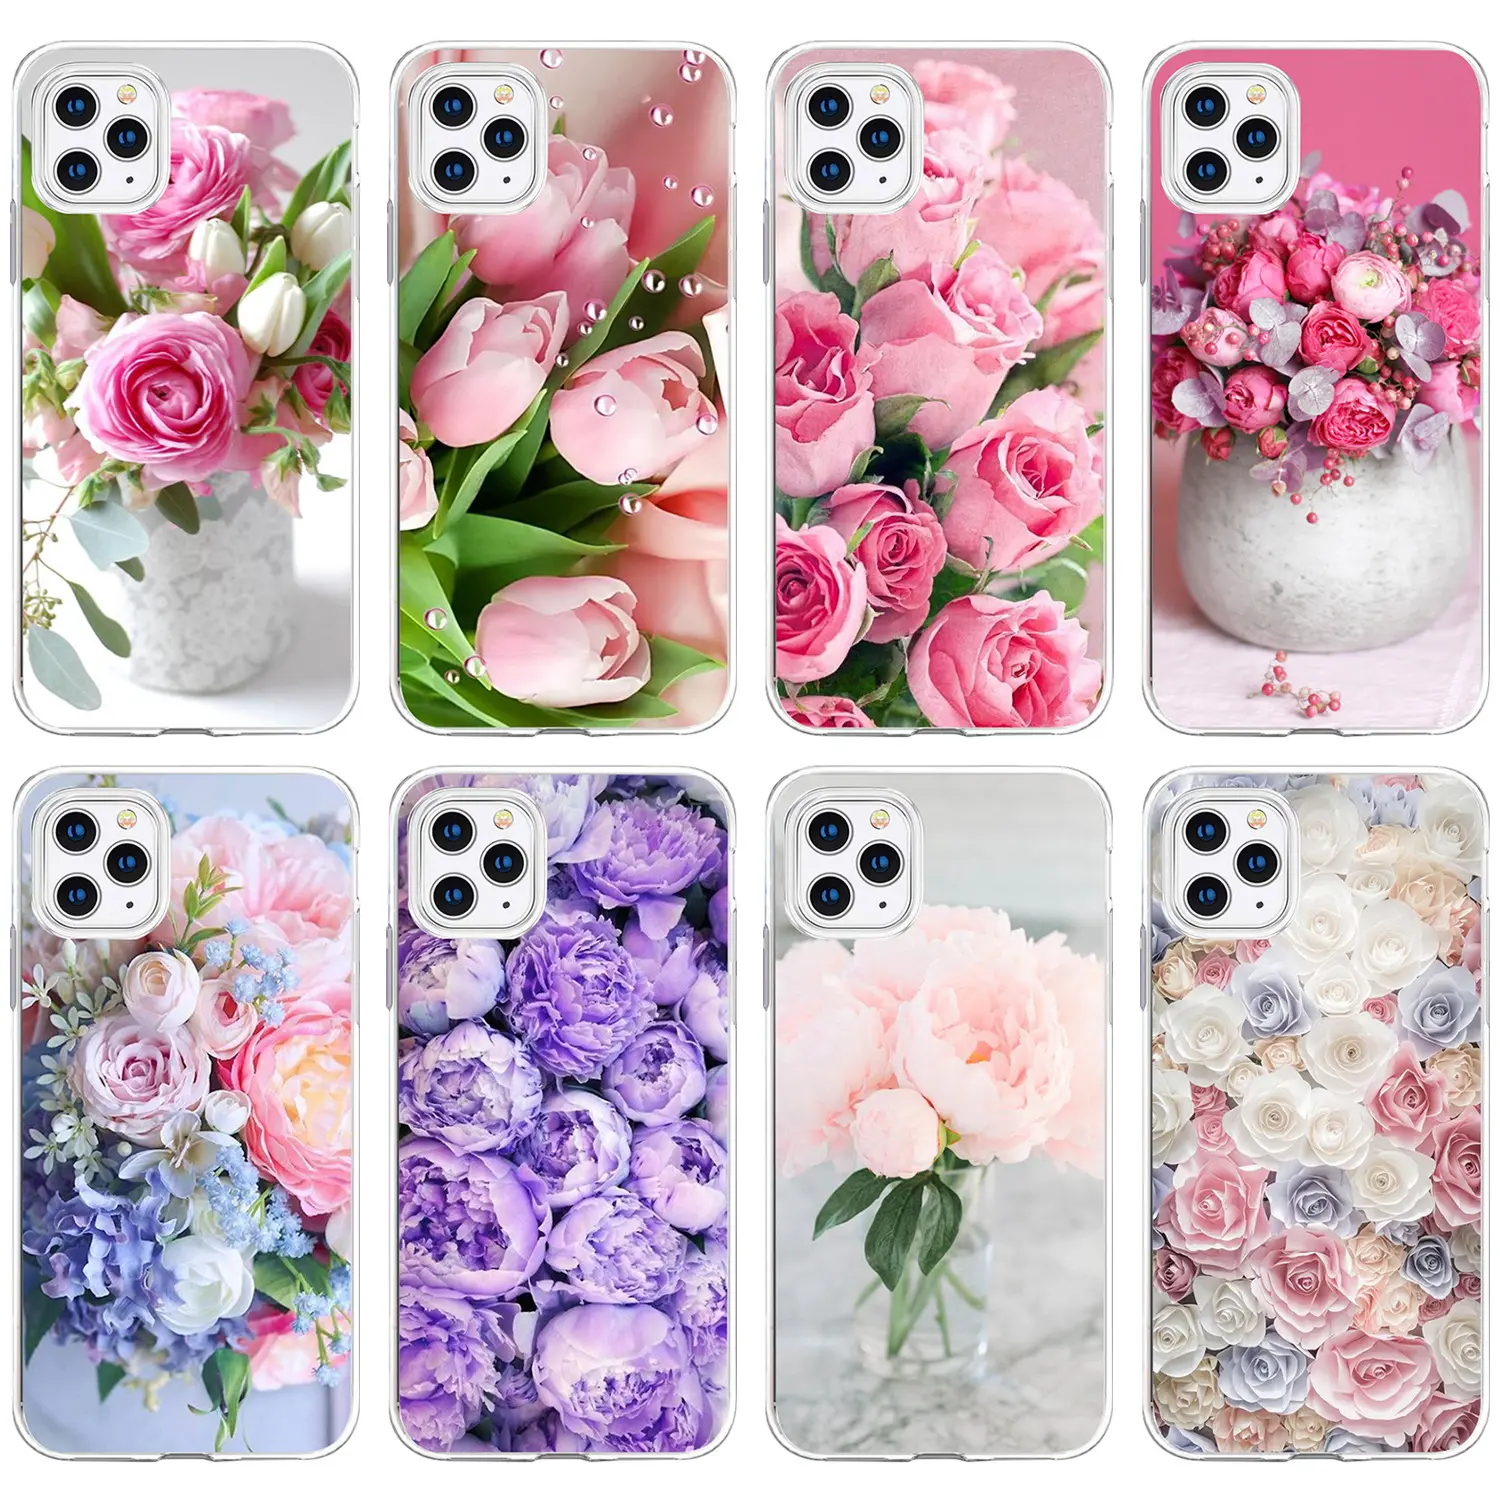 Peony Rose Flower Phone Case New Products Tpu Phone Case For Iphone Cases Luxury 11 14 12 13 Pro Max X Xs Max Xr 7 8 6 6s Plus